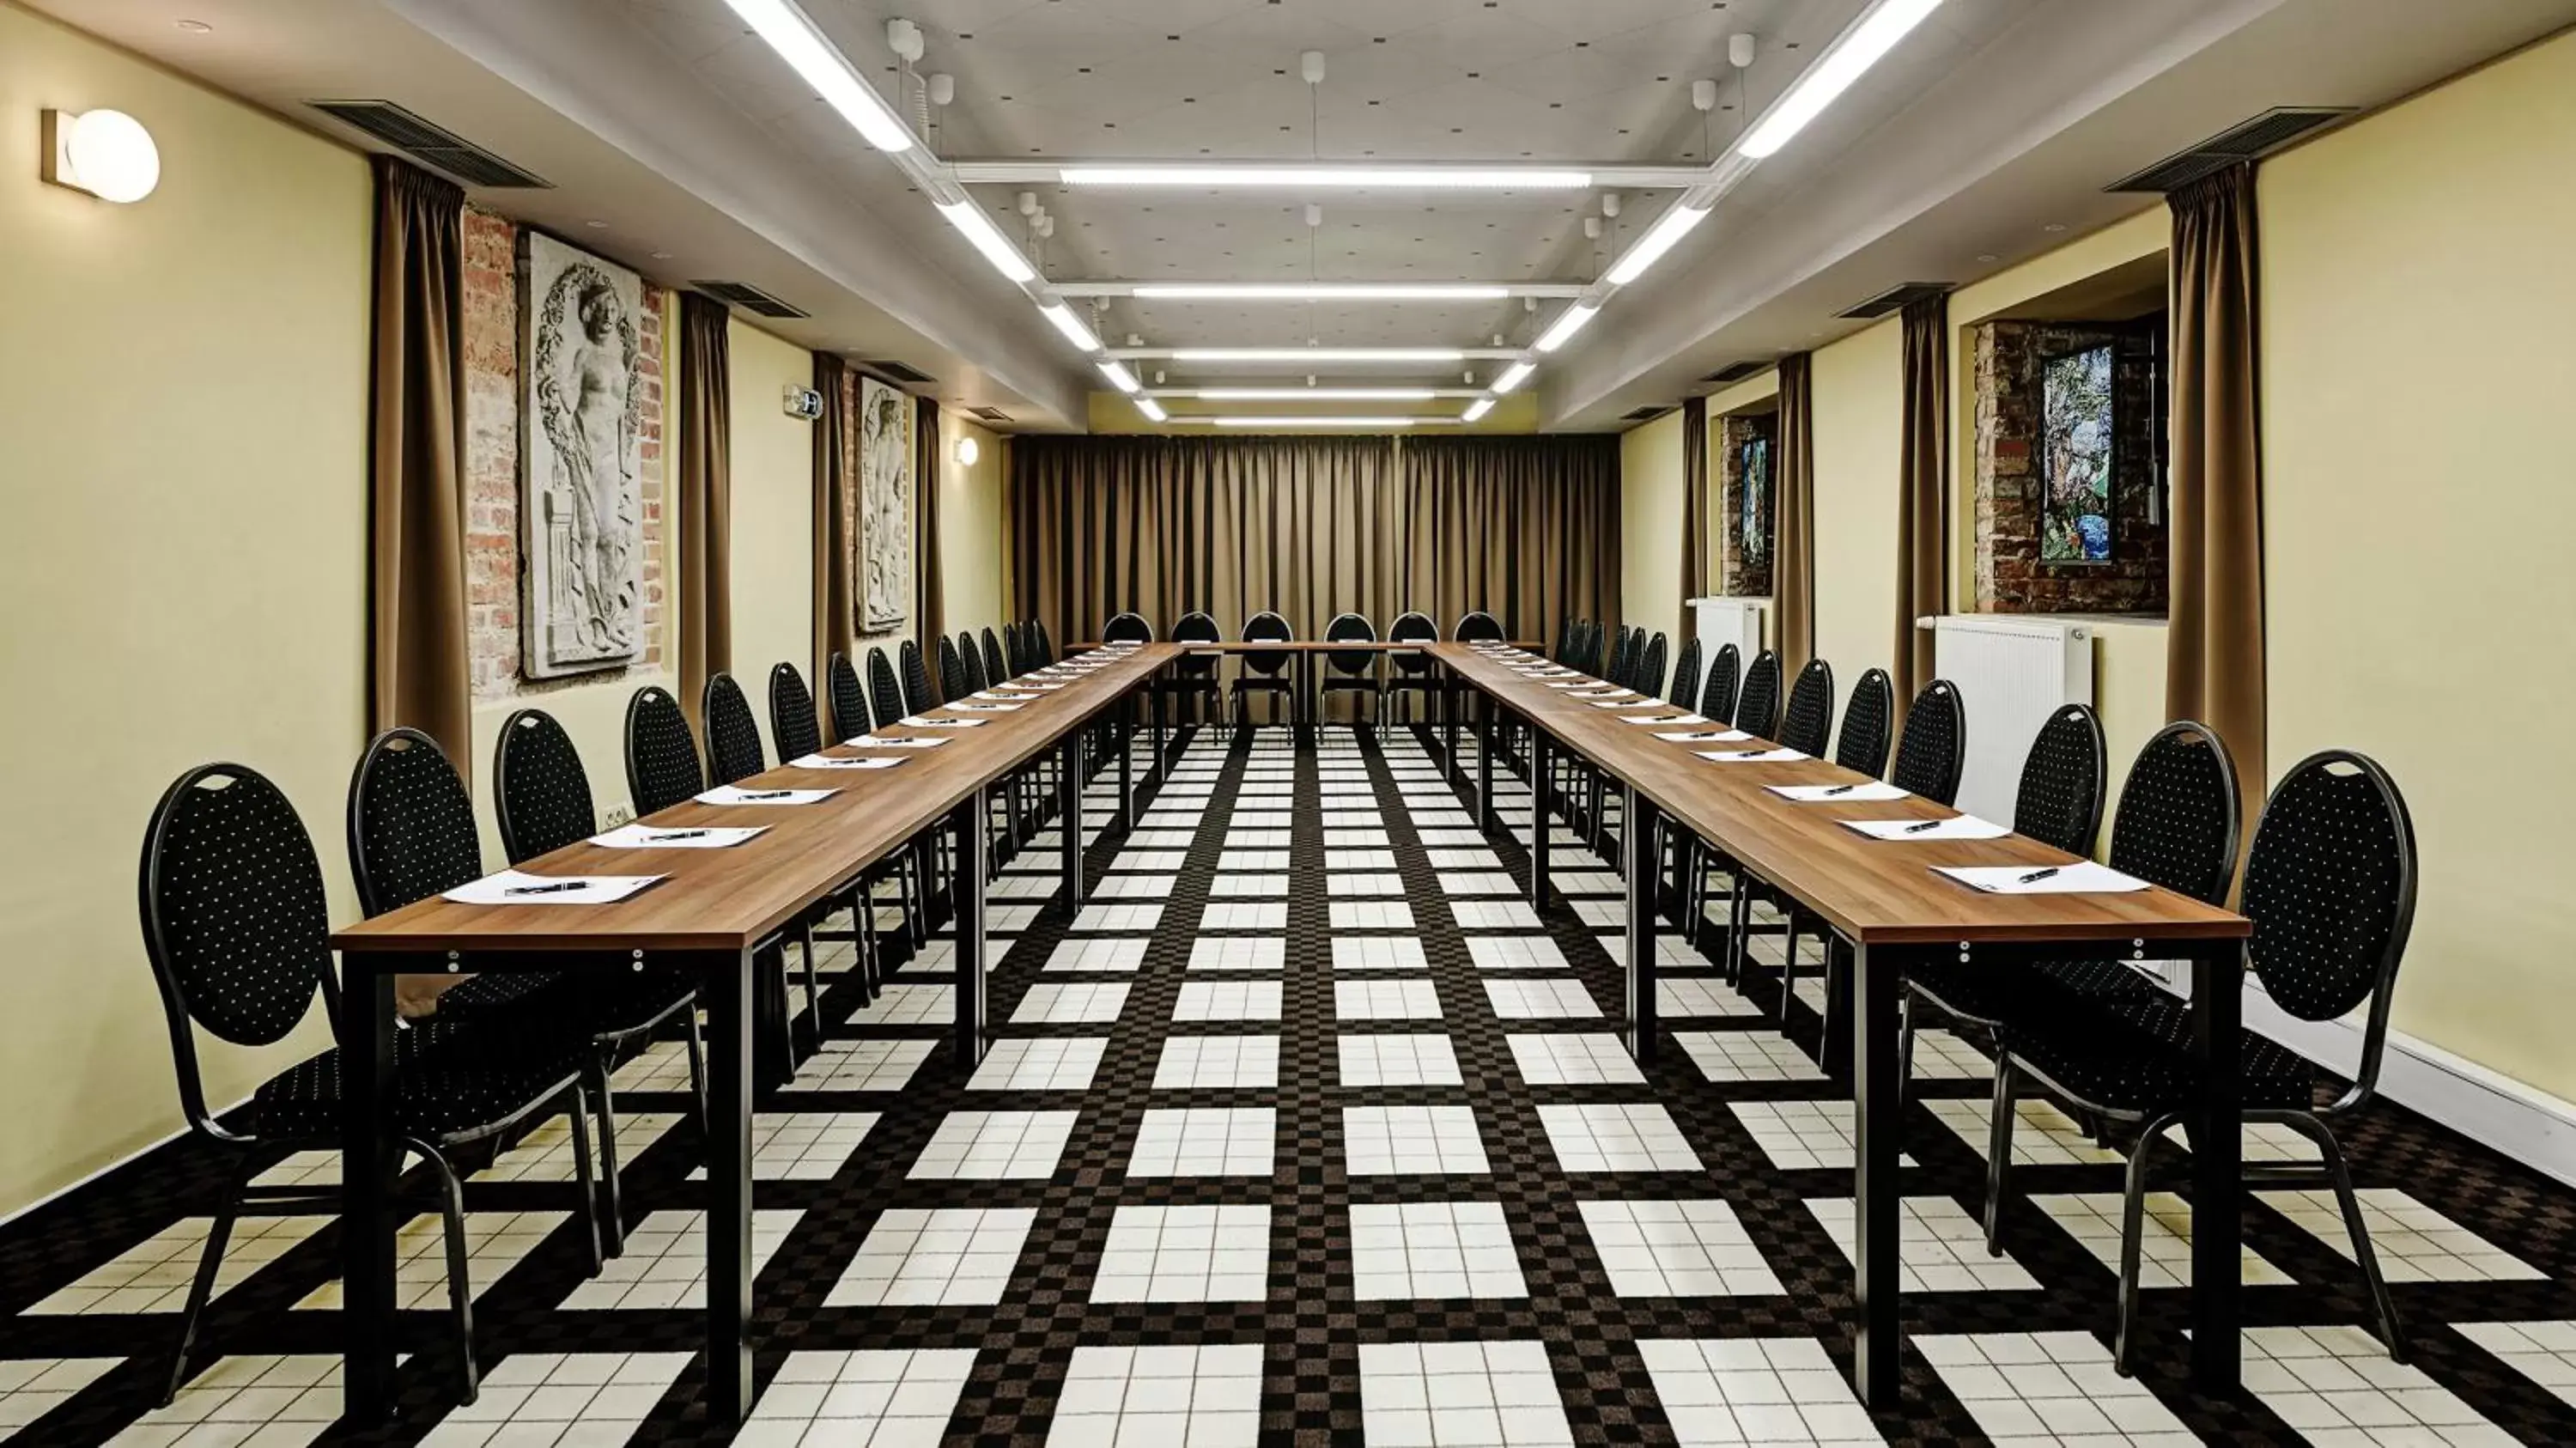 Business facilities in Grandezza Hotel Luxury Palace